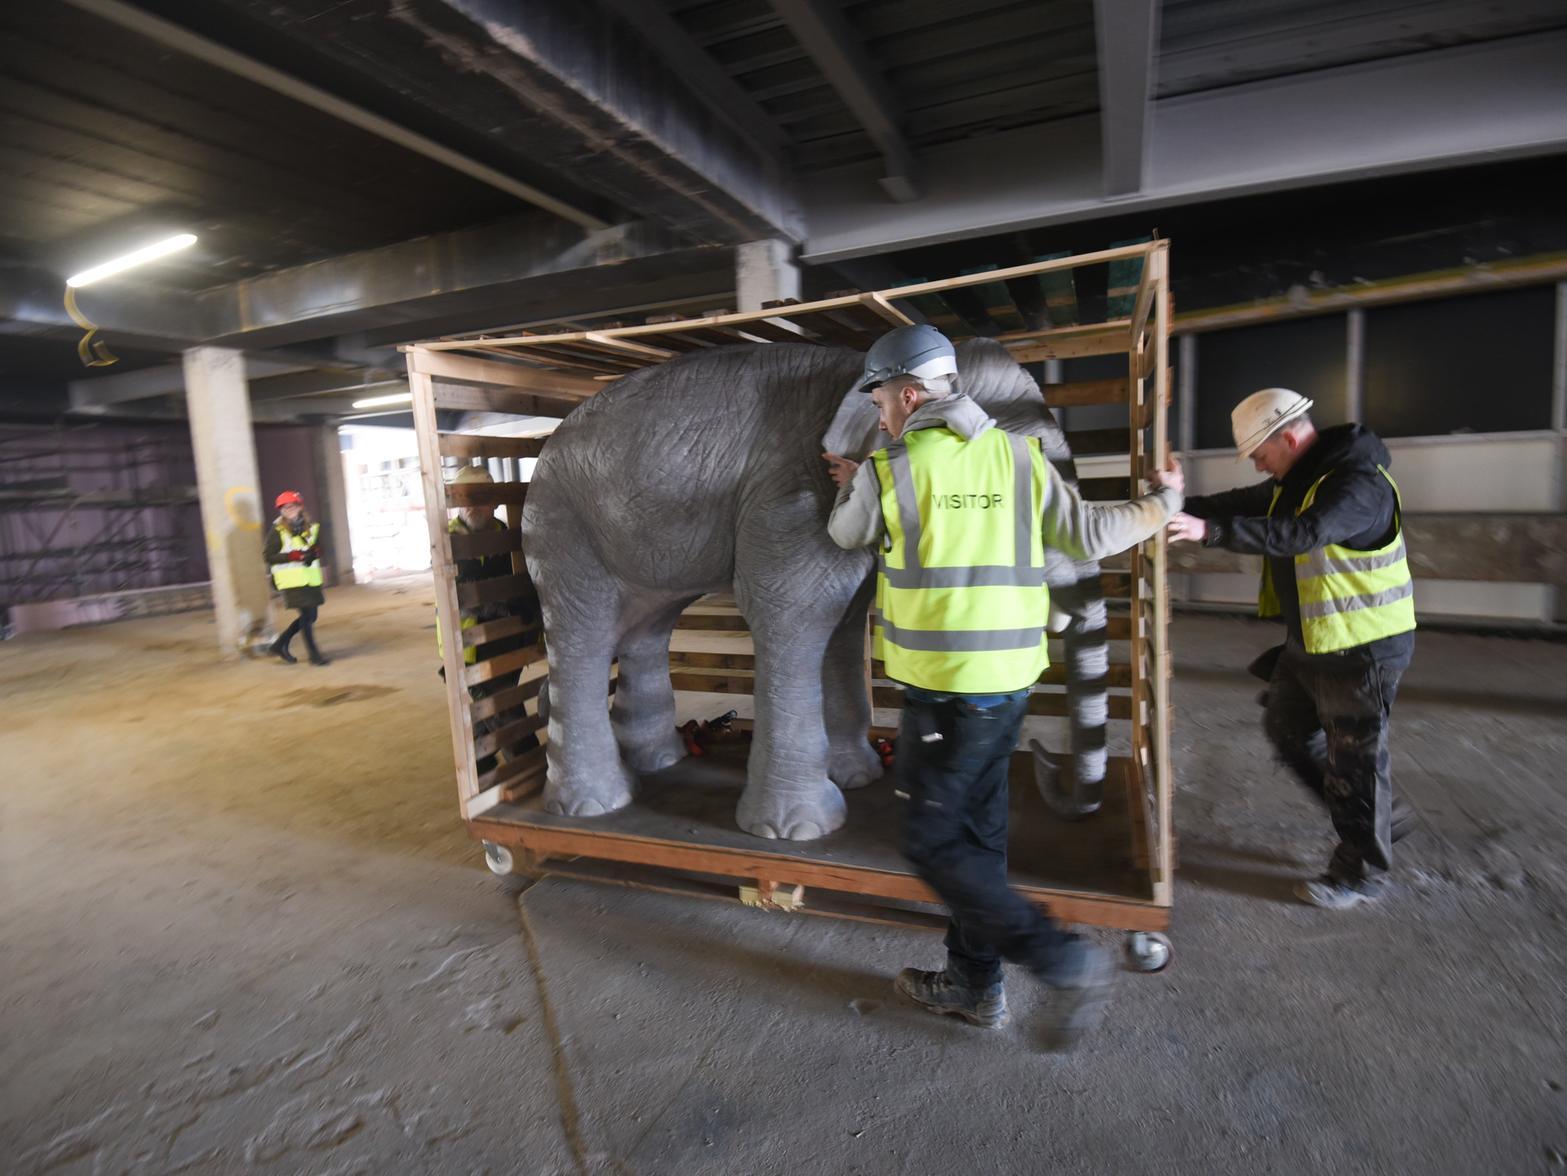 Workers move the crate into position on the first floor